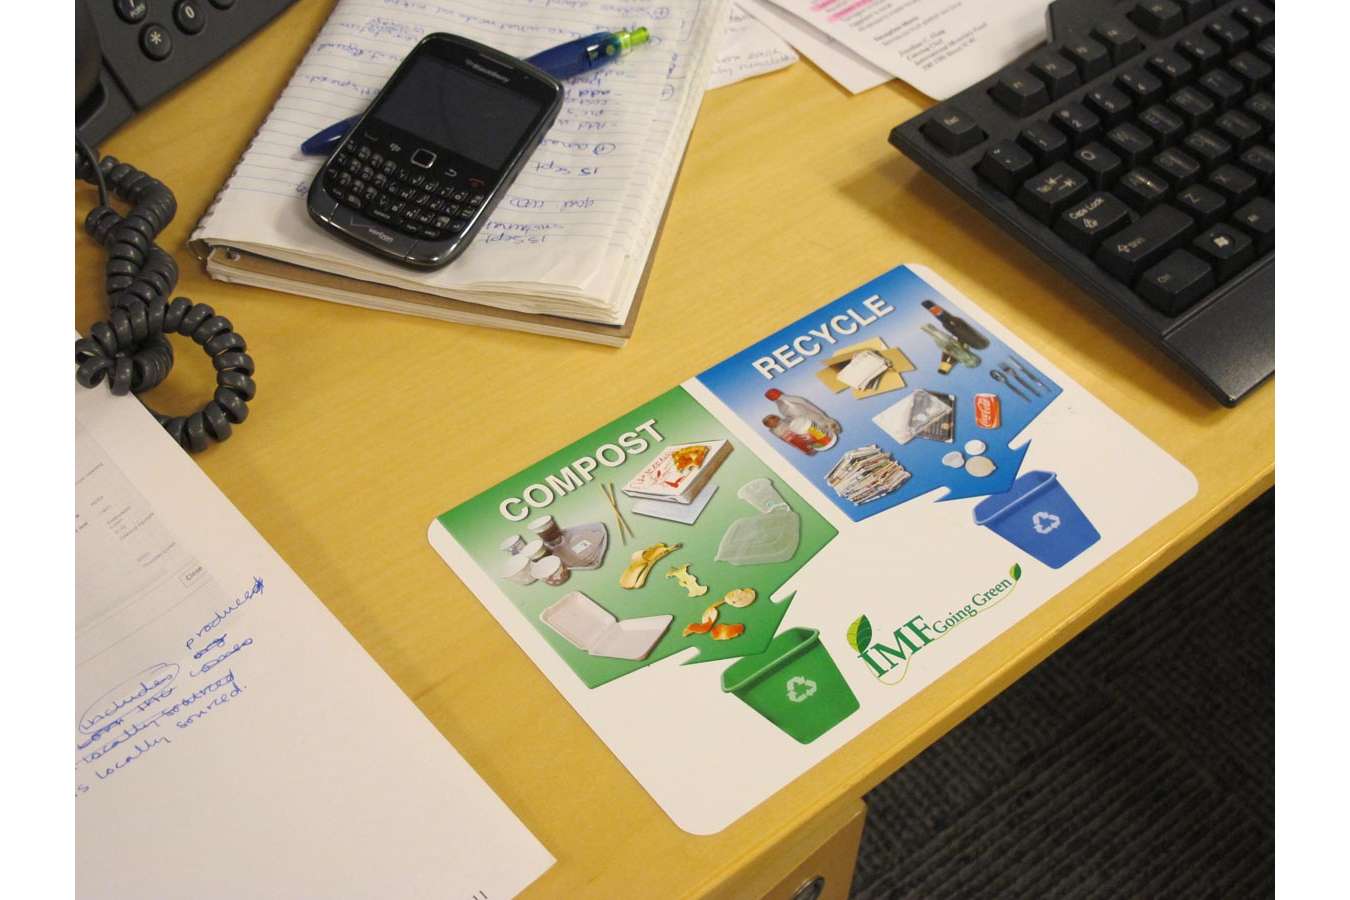 IMF Desk : Desk sticker reminds each employee what and where to recycle